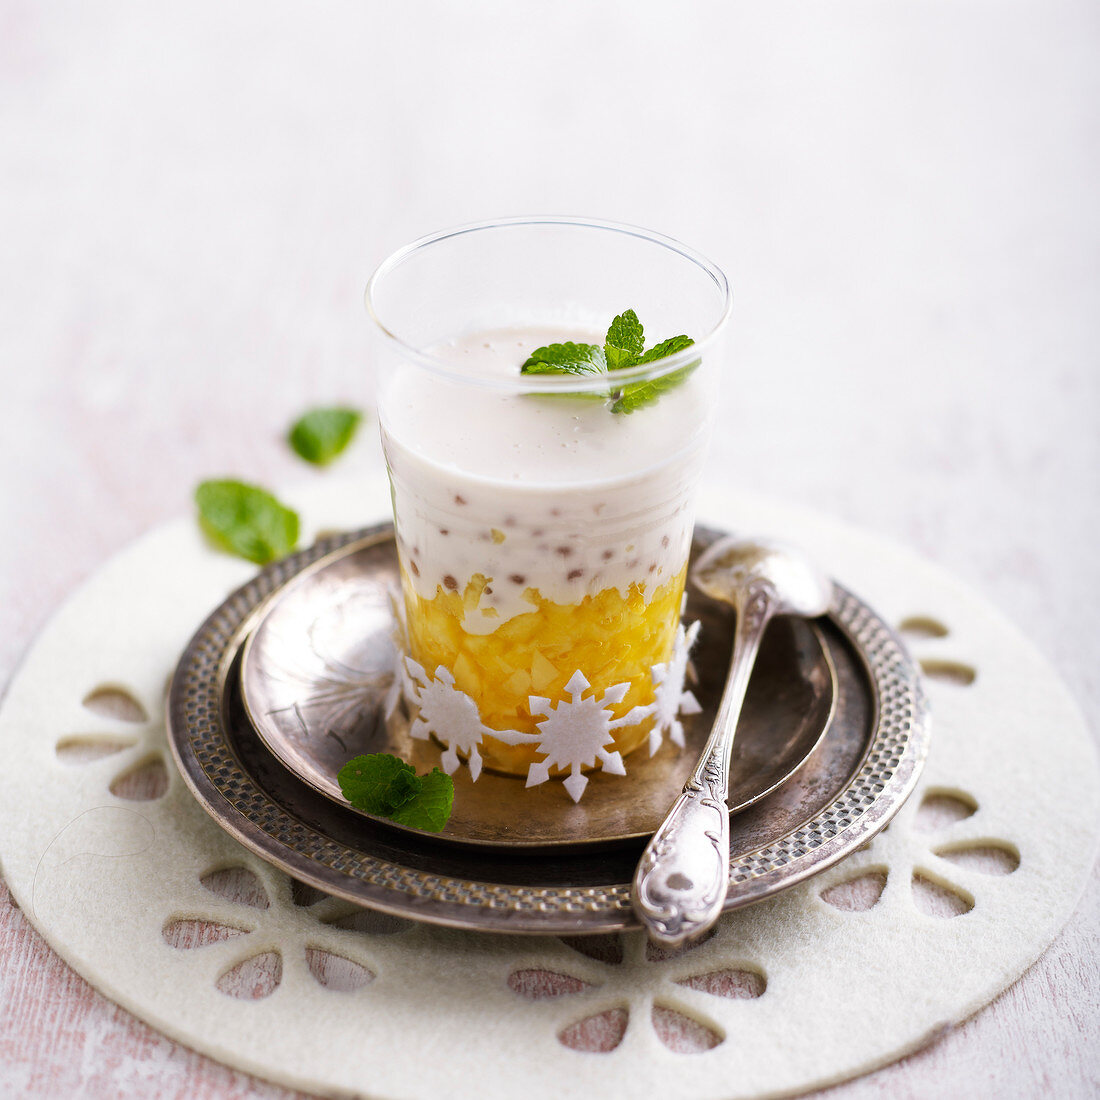 Japanese pearl and pineapple dessert